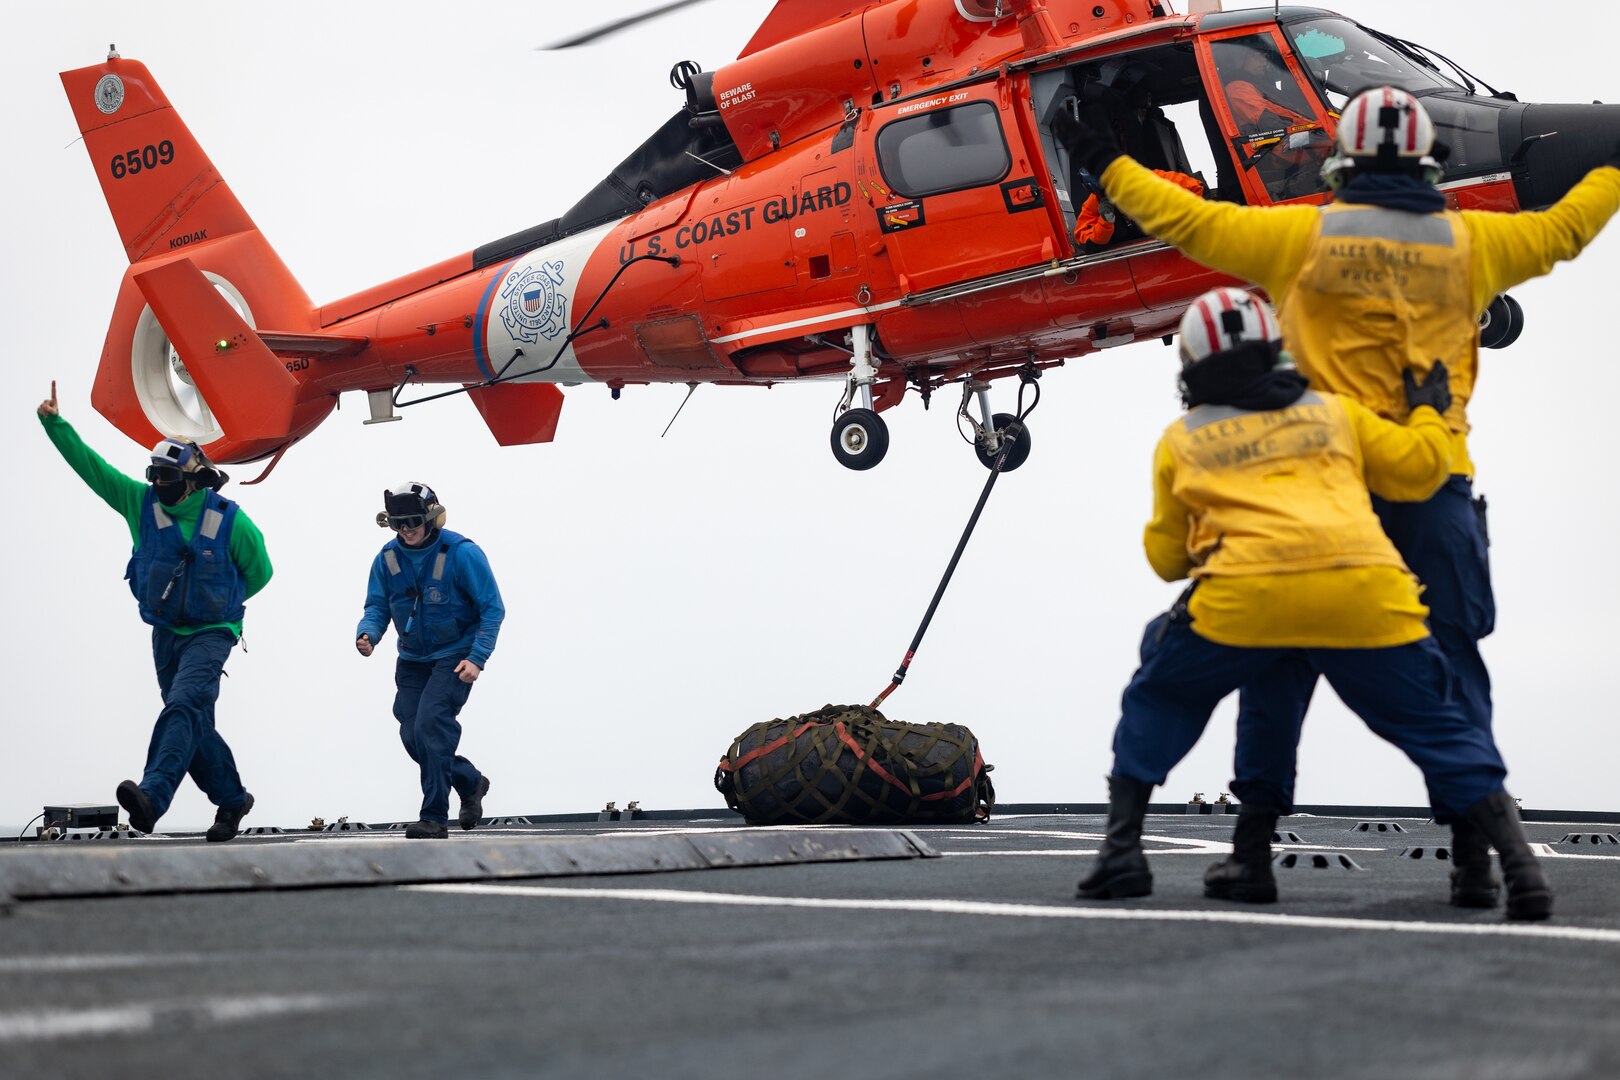 Alex Haley crewmembers assist in the landing of a MH-65 Dolphin helicopter from Air Station Kodiak in the Bering Sea, July 16, 2023. The Alex Haley is a 282-foot Medium Endurance Cutter that performs search and rescue, fisheries law enforcement and vessel safety inspections across Alaska and has been home-ported in Kodiak since 1999. U.S. Coast Guard Photo by Petty officer First Class Jasen Newman.